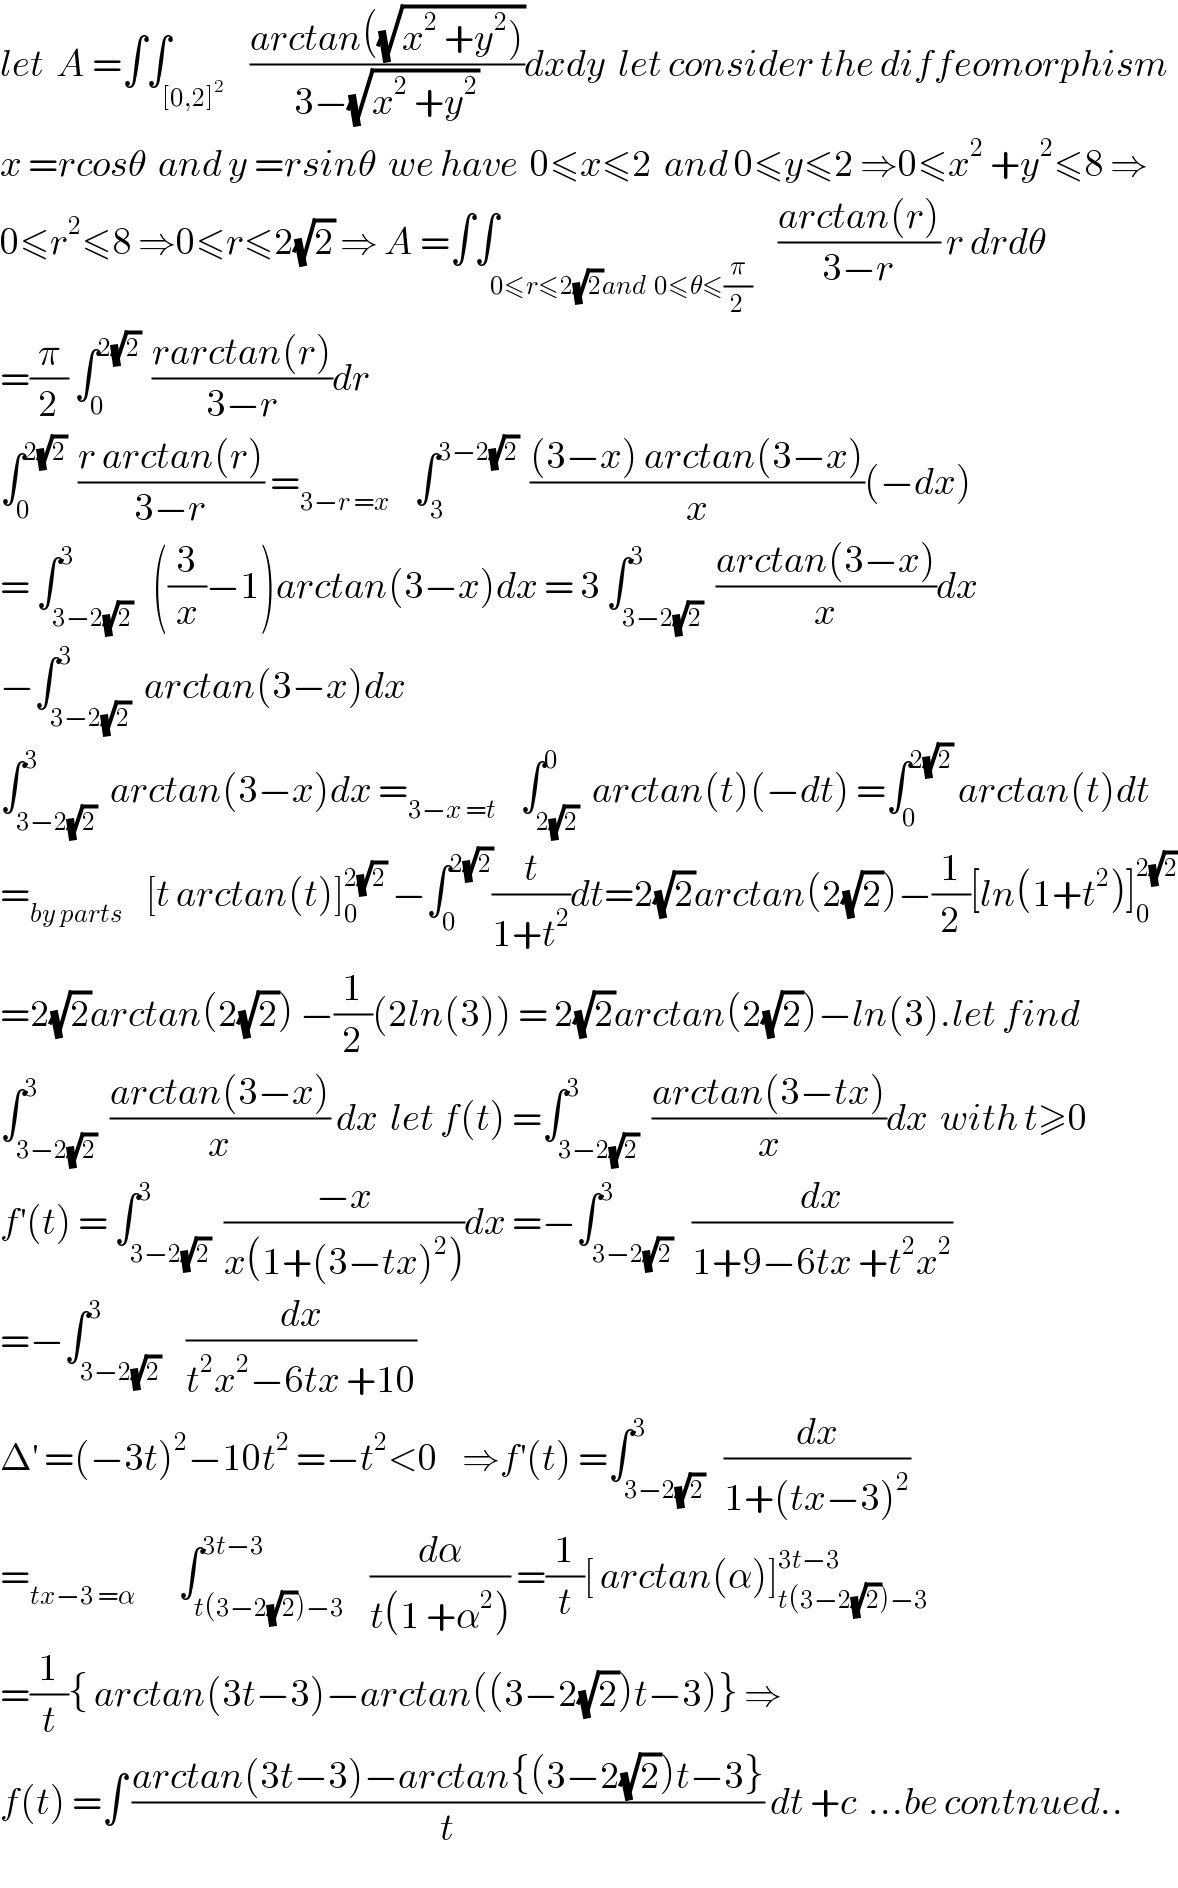 let  A =∫∫_([0,2]^2 )    ((arctan((√(x^2  +y^2 ))))/(3−(√(x^2  +y^2 ))))dxdy  let consider the diffeomorphism  x =rcosθ  and y =rsinθ  we have  0≤x≤2  and 0≤y≤2 ⇒0≤x^2  +y^2 ≤8 ⇒  0≤r^2 ≤8 ⇒0≤r≤2(√2) ⇒ A =∫∫_(0≤r≤2(√2)and  0≤θ≤(π/2))    ((arctan(r))/(3−r)) r drdθ  =(π/2) ∫_0 ^(2(√2))   ((rarctan(r))/(3−r))dr  ∫_0 ^(2(√2))   ((r arctan(r))/(3−r)) =_(3−r =x)     ∫_3 ^(3−2(√2))   (((3−x) arctan(3−x))/x)(−dx)  = ∫_(3−2(√2)) ^3   ((3/x)−1)arctan(3−x)dx = 3 ∫_(3−2(√2)) ^3  ((arctan(3−x))/x)dx  −∫_(3−2(√2)) ^3  arctan(3−x)dx  ∫_(3−2(√2)) ^3  arctan(3−x)dx =_(3−x =t)     ∫_(2(√2)) ^0  arctan(t)(−dt) =∫_0 ^(2(√2))  arctan(t)dt  =_(by parts)     [t arctan(t)]_0 ^(2(√2))  −∫_0 ^(2(√2)) (t/(1+t^2 ))dt=2(√2)arctan(2(√2))−(1/2)[ln(1+t^2 )]_0 ^(2(√2))   =2(√2)arctan(2(√2)) −(1/2)(2ln(3)) = 2(√2)arctan(2(√2))−ln(3).let find   ∫_(3−2(√2)) ^3  ((arctan(3−x))/x) dx  let f(t) =∫_(3−2(√2)) ^3  ((arctan(3−tx))/x)dx  with t≥0  f^′ (t) = ∫_(3−2(√2)) ^3  ((−x)/(x(1+(3−tx)^2 )))dx =−∫_(3−2(√2)) ^3   (dx/(1+9−6tx +t^2 x^2 ))  =−∫_(3−2(√2)) ^3    (dx/(t^2 x^2 −6tx +10))  Δ^′  =(−3t)^2 −10t^2  =−t^2 <0    ⇒f^′ (t) =∫_(3−2(√2)) ^3   (dx/(1+(tx−3)^2 ))  =_(tx−3 =α)        ∫_(t(3−2(√2))−3) ^(3t−3)    (dα/(t(1 +α^2 ))) =(1/t)[ arctan(α)]_(t(3−2(√2))−3) ^(3t−3)   =(1/t){ arctan(3t−3)−arctan((3−2(√2))t−3)} ⇒  f(t) =∫ ((arctan(3t−3)−arctan{(3−2(√2))t−3})/t) dt +c  ...be contnued..  